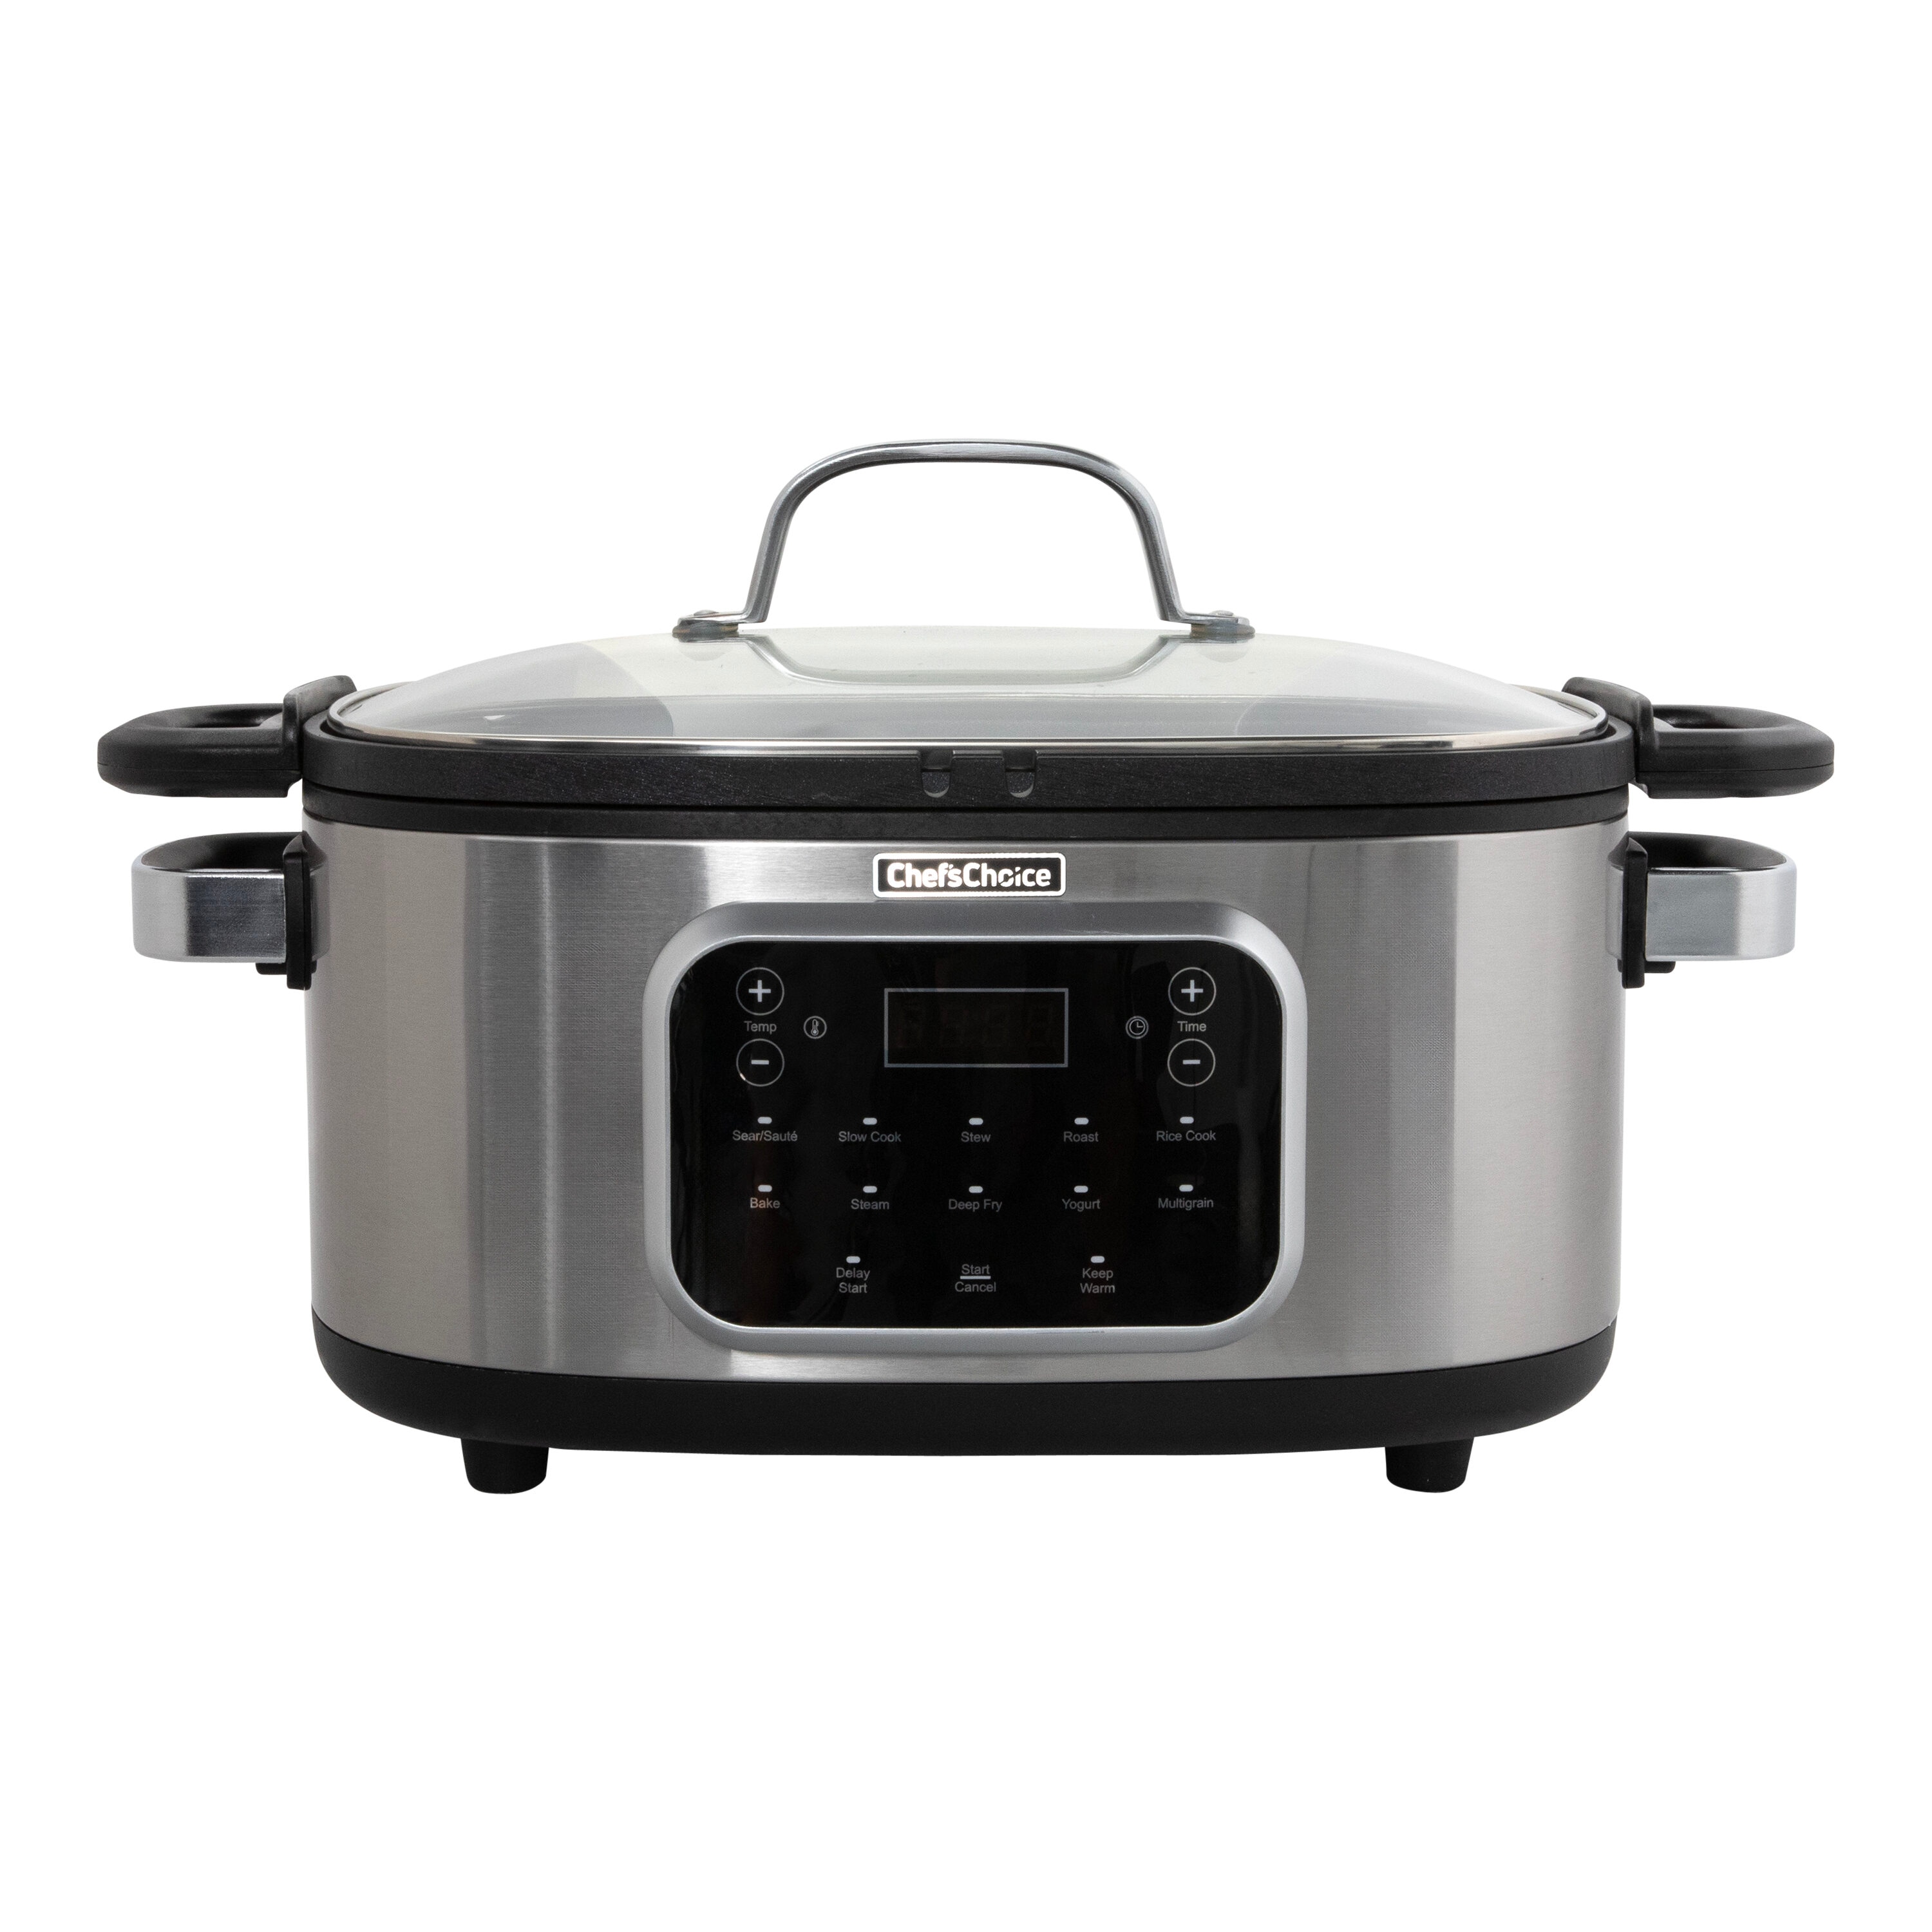 MegaChef Triple 2.5 Quart Slow Cooker and Buffet Server in Brushed Silver